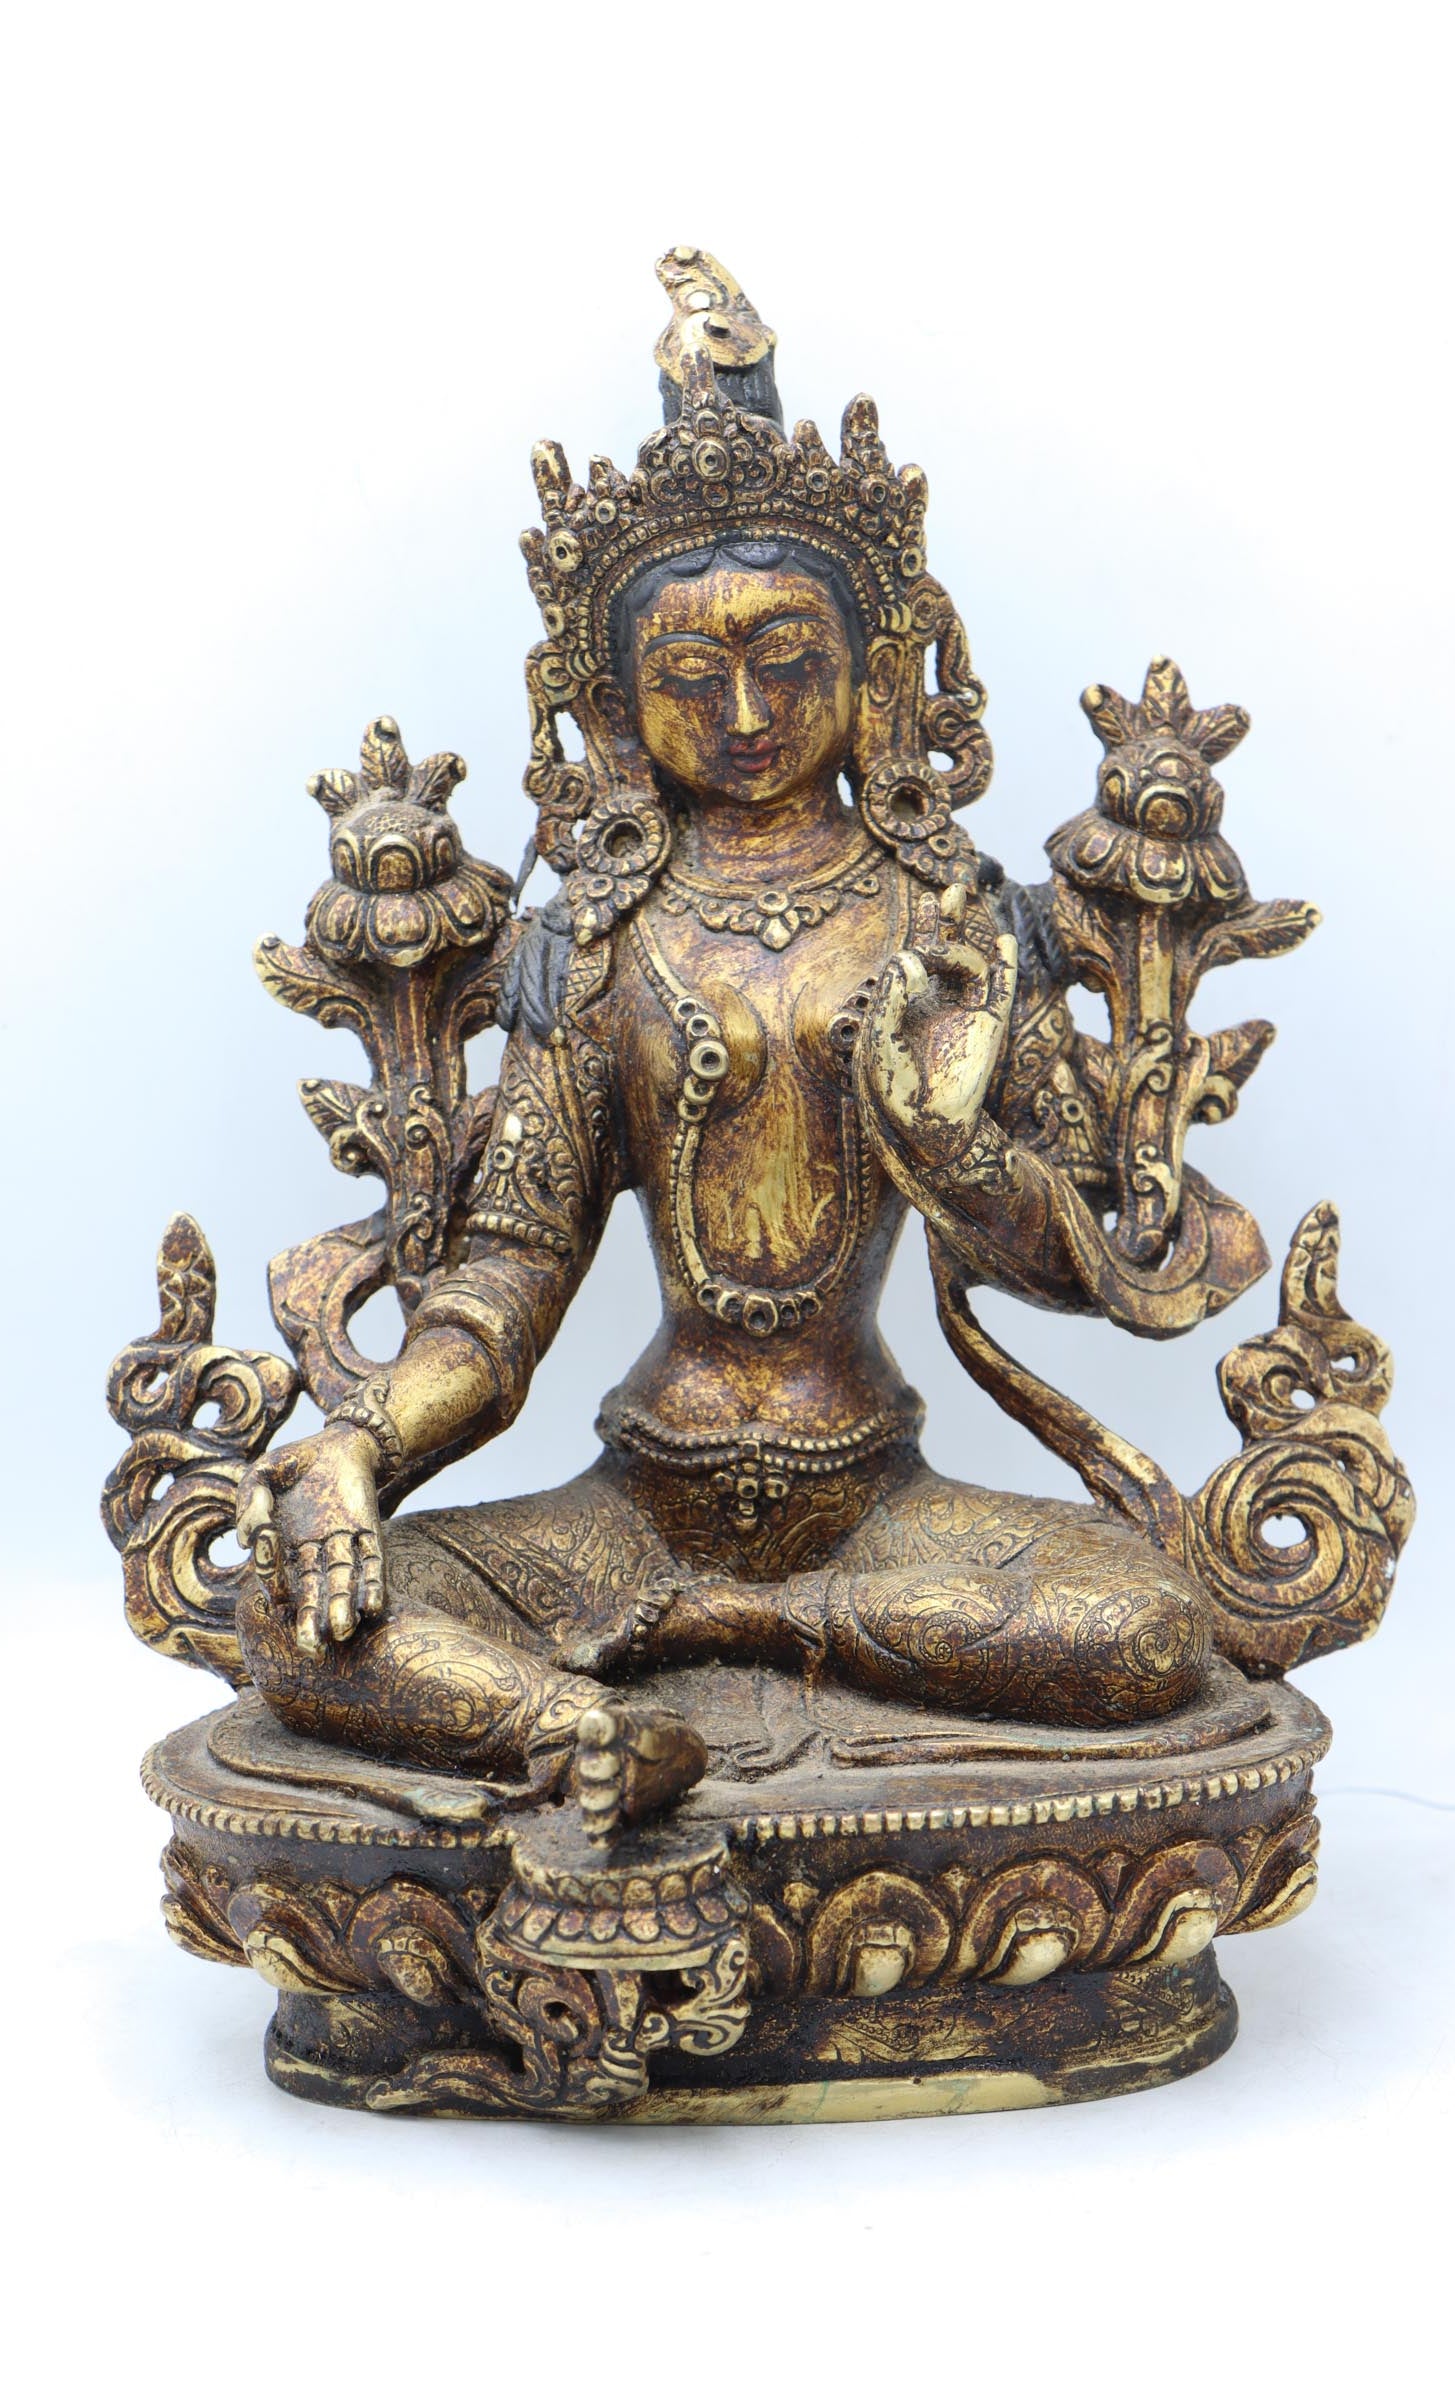  Green Tara Statue for healing, and freedom from unease and obstructions.